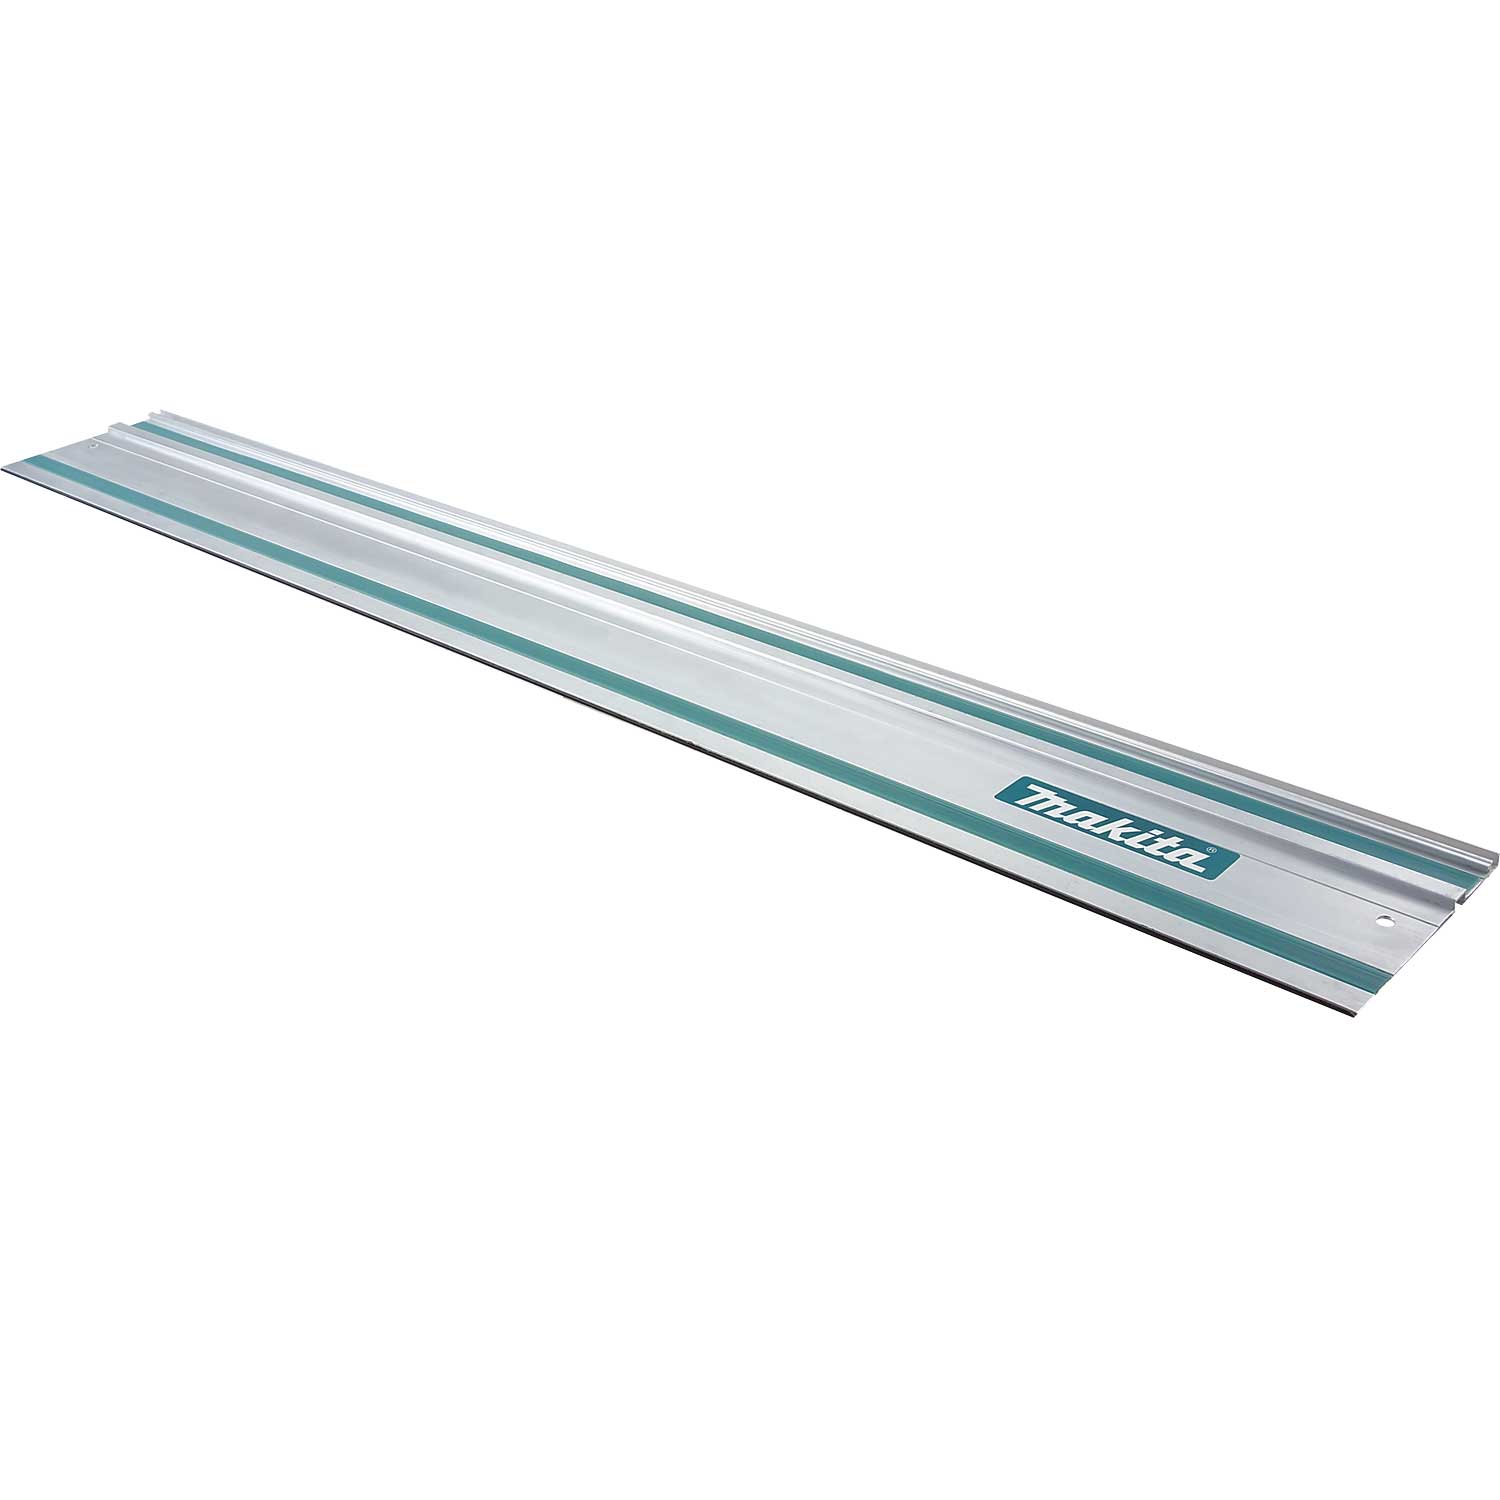 MAKITA 118" GUIDE RAIL / TRACK FOR PLUNGE CUT SAW - Kilrich Building Centres